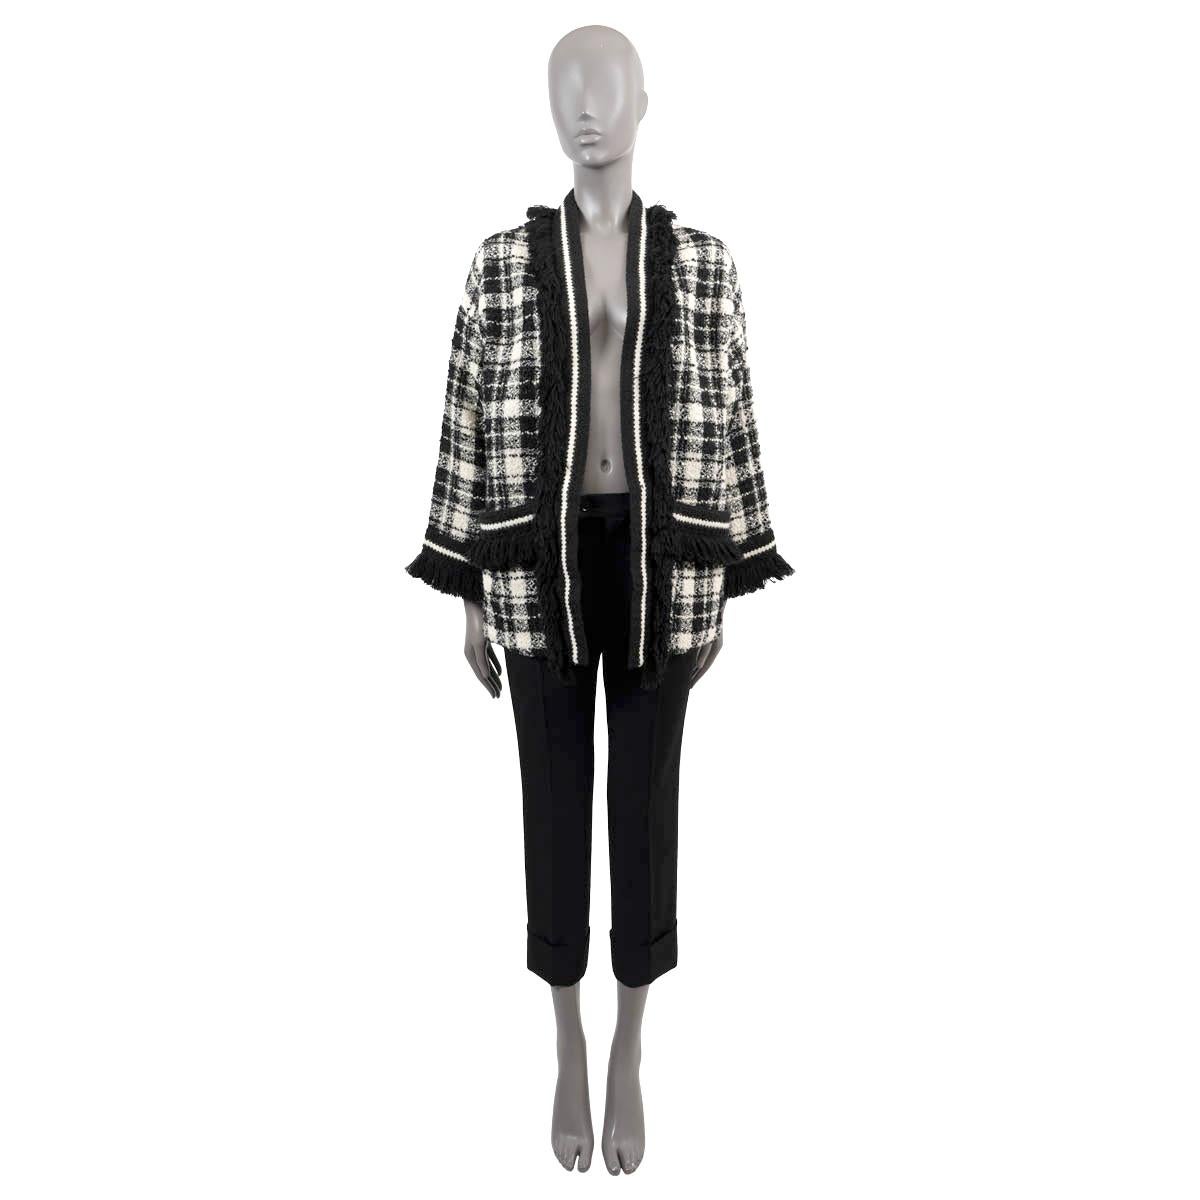 100% authentic Gucci open tweed in black and cream wool (with 2% polyamide). Features an oversized silhouette, fringe trims and two open pockets at the waist. Lined in silk (100%). Has been worn and is in excellent condition.

2021